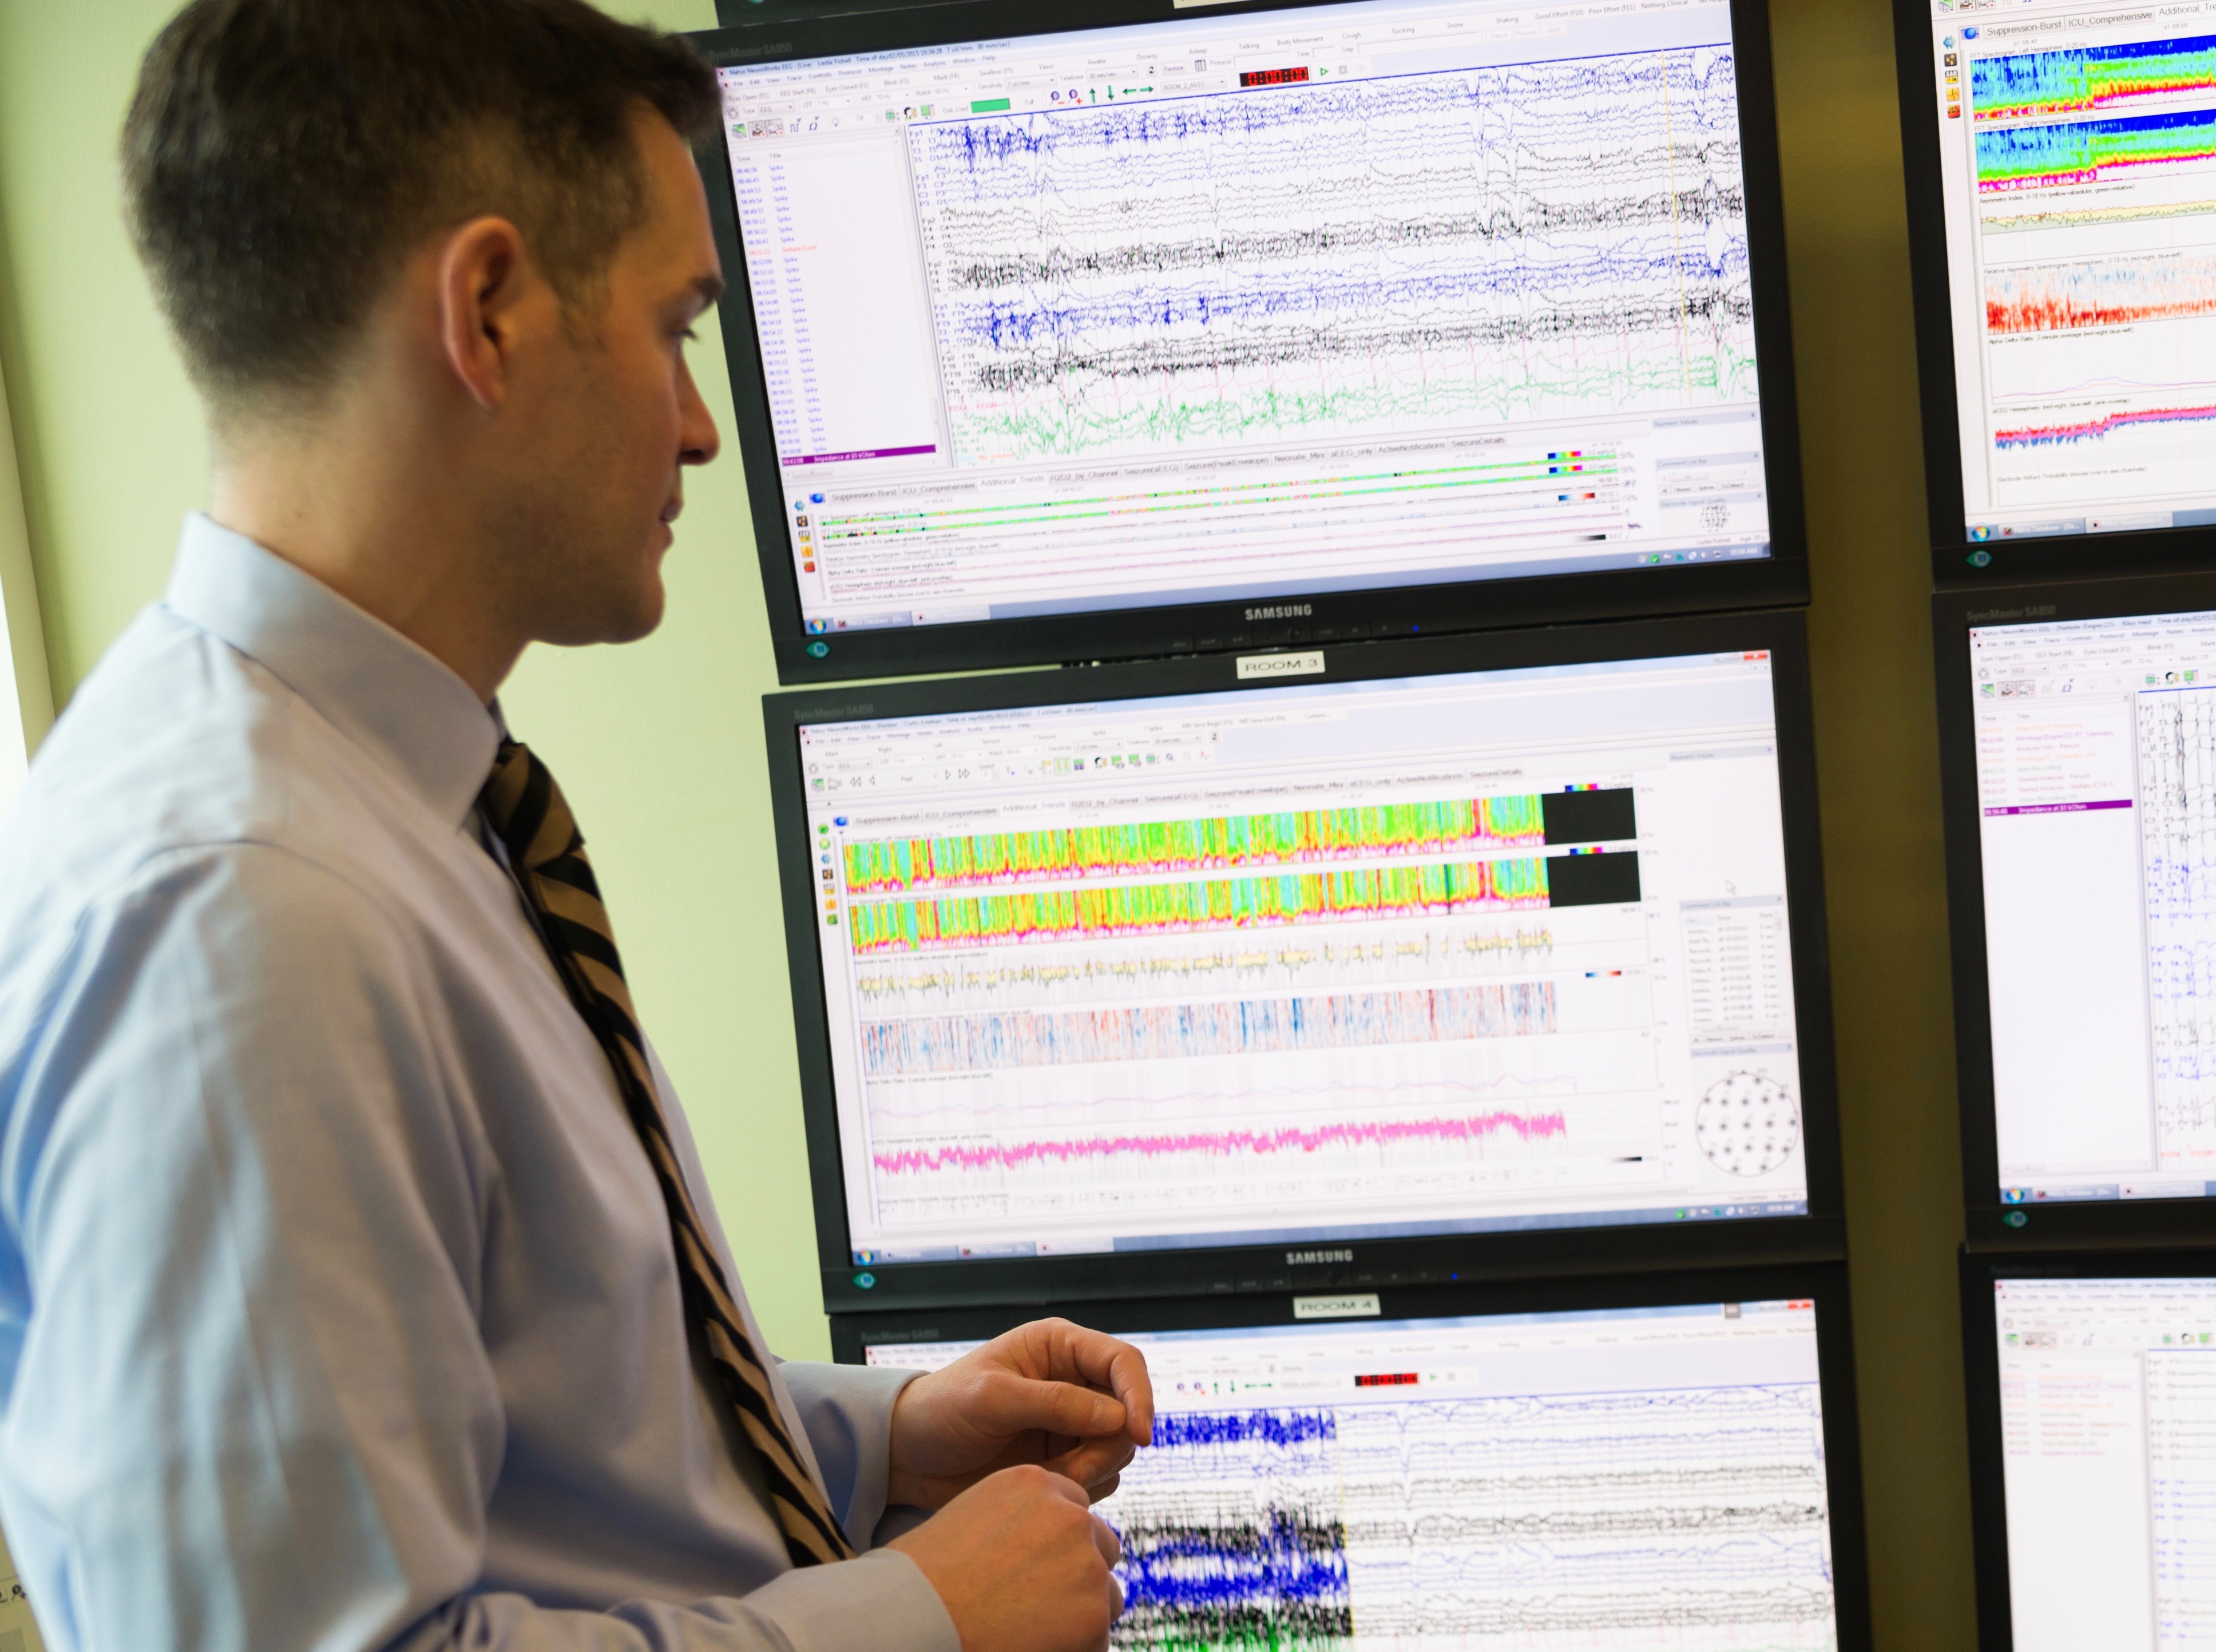 Dr. Paul Motika, a neurologist on our team, looks at detailed monitoring results in the EMU, Epilepsy Monitoring Unit